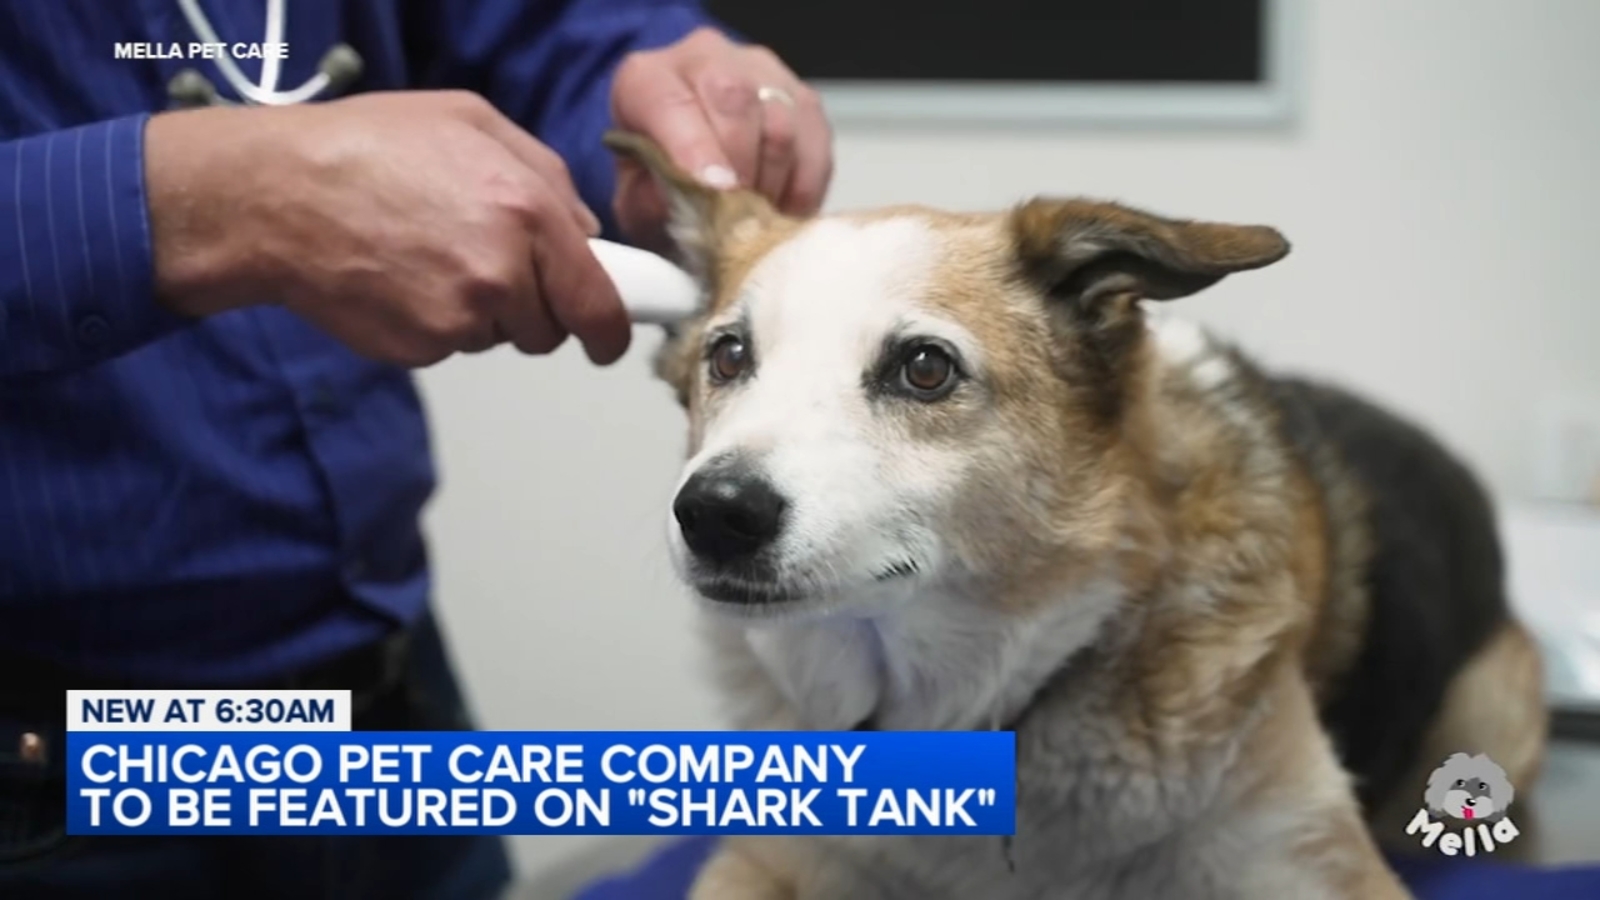 Chicago pet care company Mella to be featured on ‘Shark Tank’ [Video]